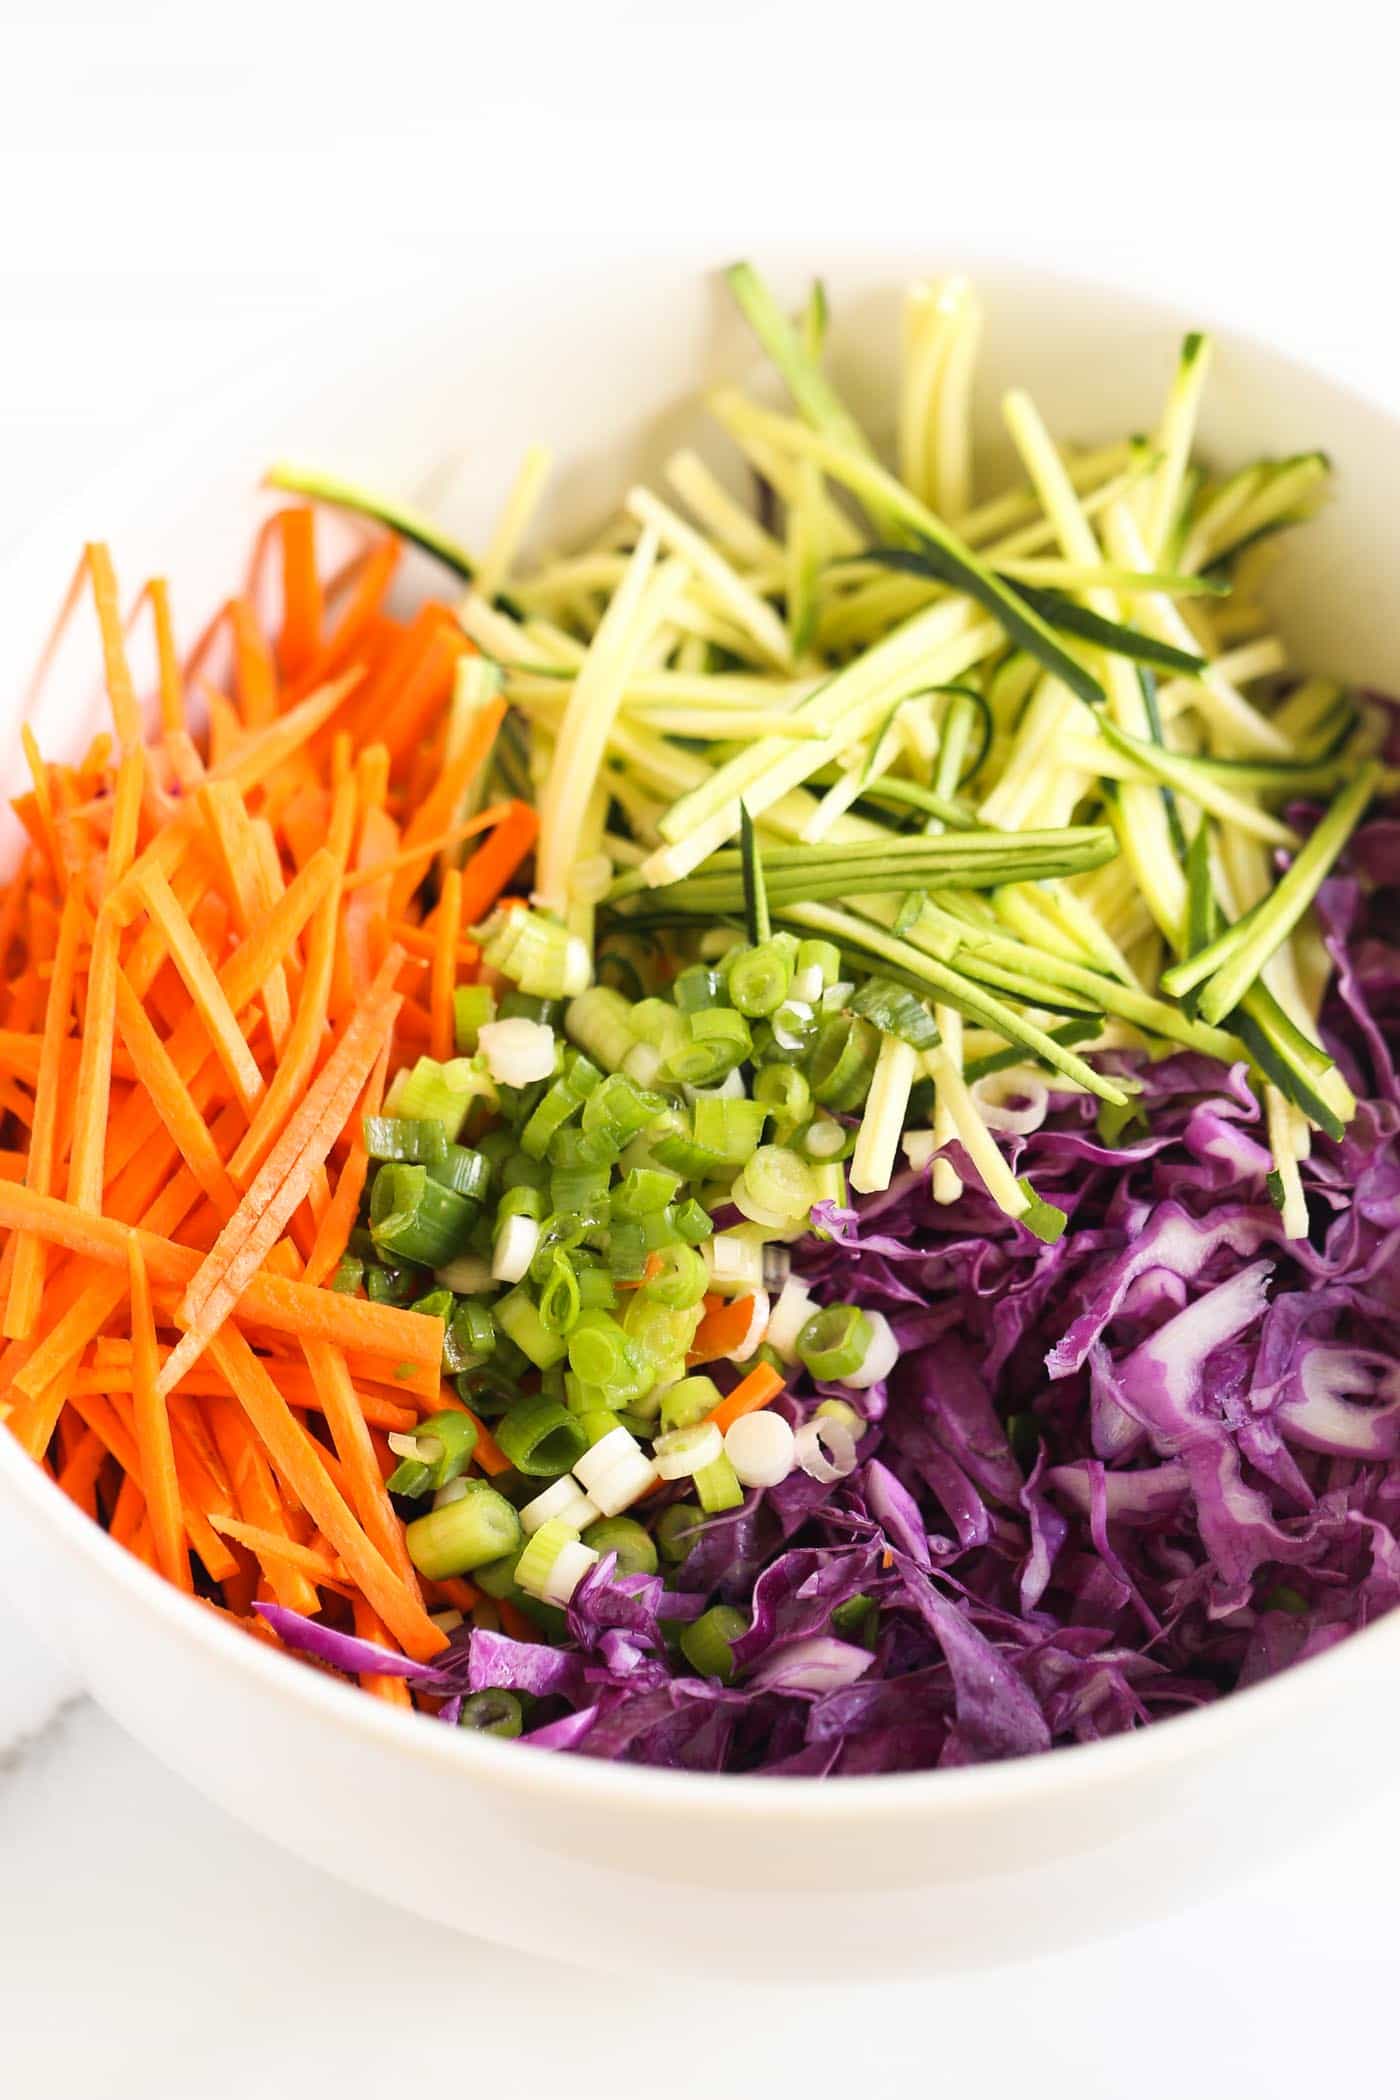 The perfect base for a MAYO-FREE coleslaw recipe!